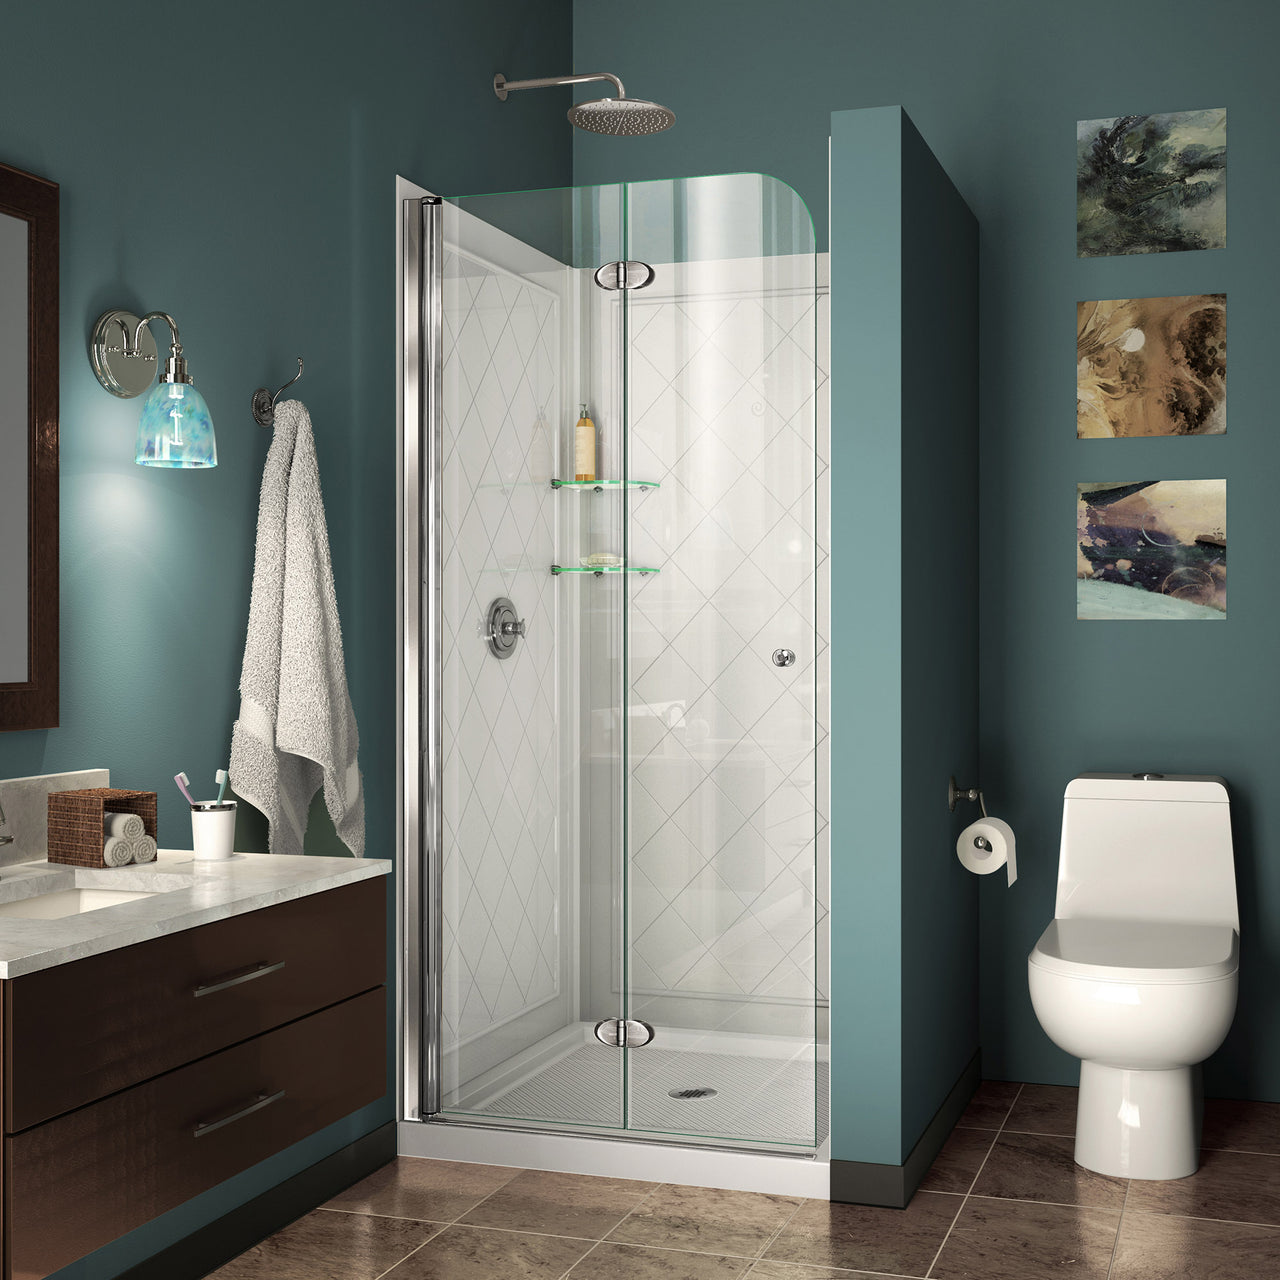 DreamLine Aqua Fold 36 in. D x 36 in. W x 76 3/4 in. H Frameless Bi-Fold Shower Door with Shower Base and QWALL-5 Shower Backwalls Kit - BNGBath